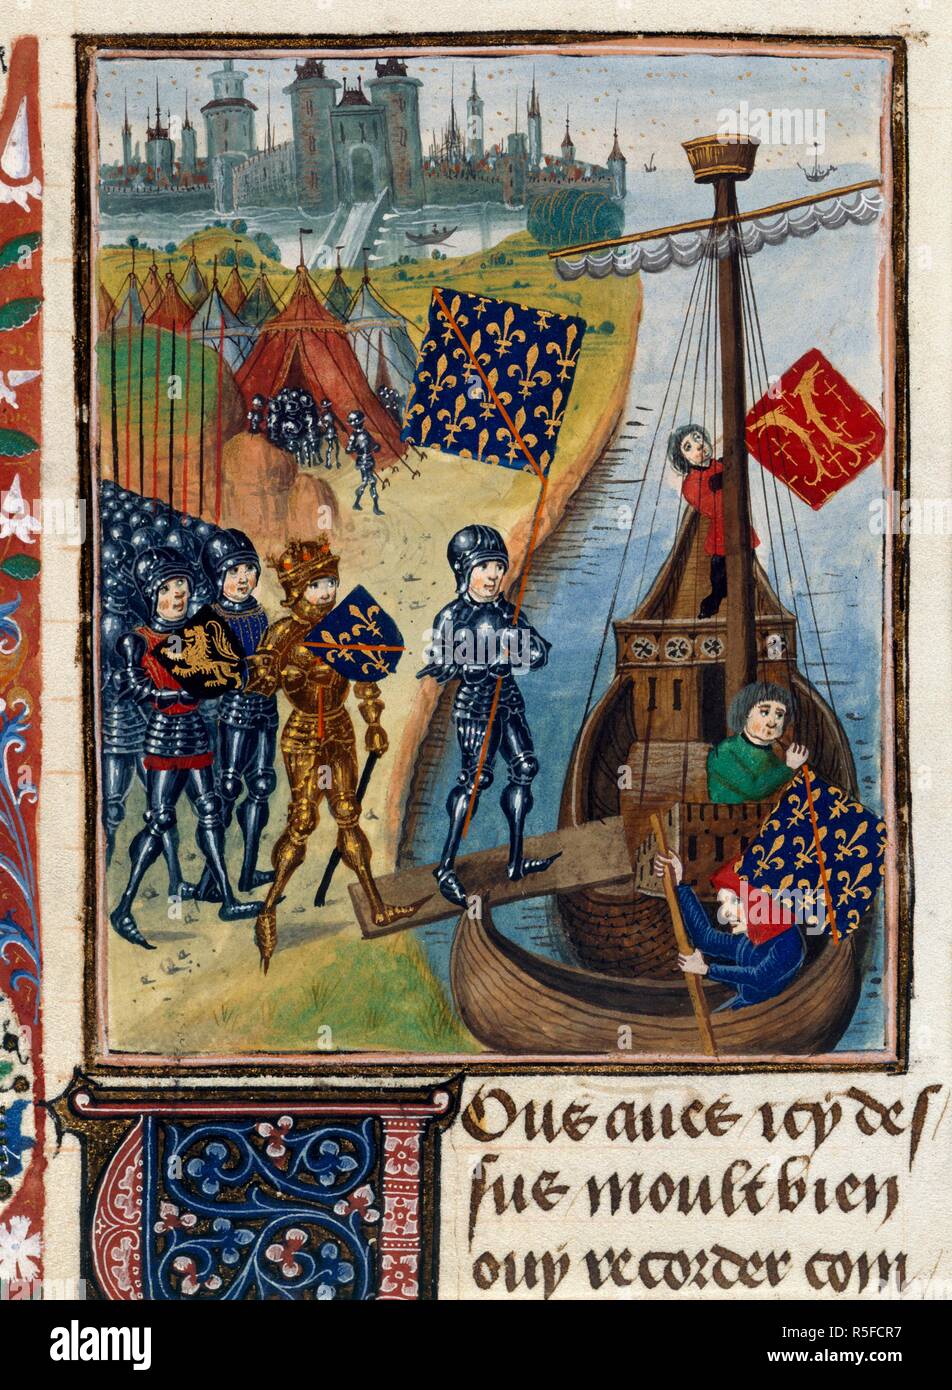 Siege of pirate stronghold. Chroniques, Vol. IV, part 1 (the 'Harley Froissart'). (Froissart's Chronicles). S. Netherlands (Bruges), 1470-1475. (Miniature) The raising of the siege of the pirate stronghold in North Africa (Mahedia).  Image taken from Froissart's Chronicles (Volume IV, part 1).  Originally published/produced in S. Netherlands (Bruges), 1470-1475. . Source: Harley 4379, f.104v. Language: French. Author: FROISSART, JEAN. Stock Photo